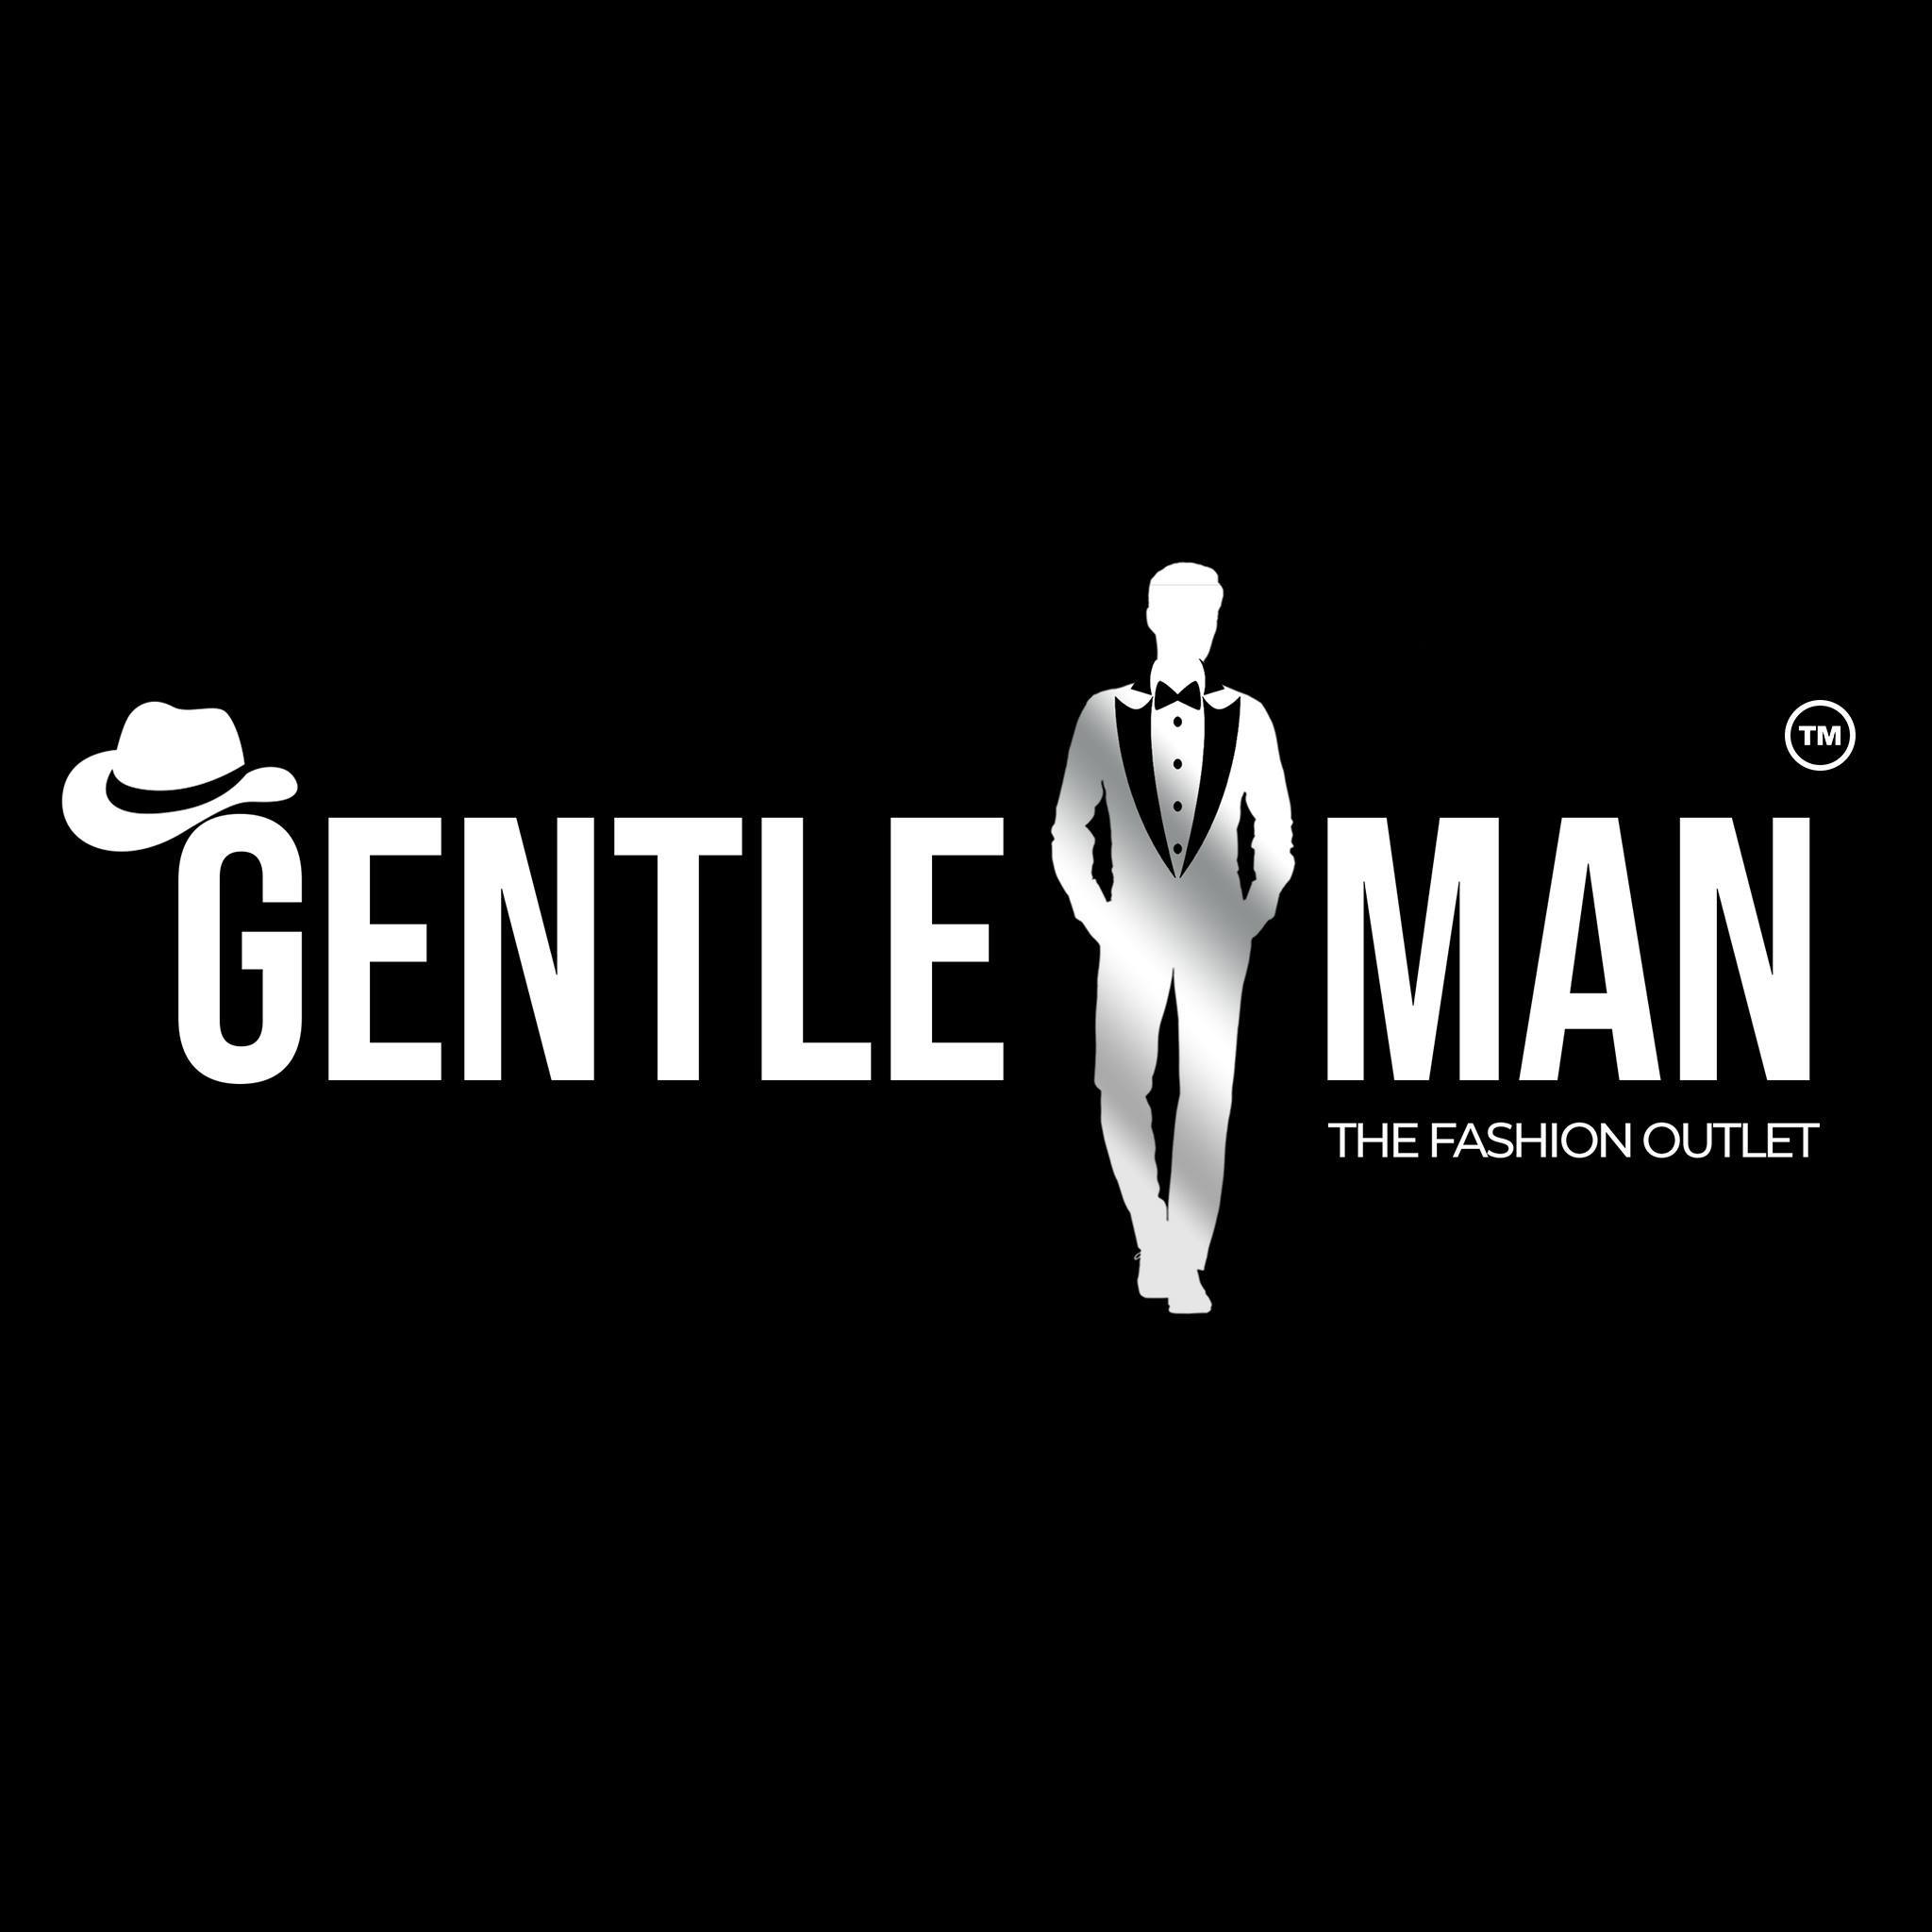 Gentleman-The Fashion Outlet